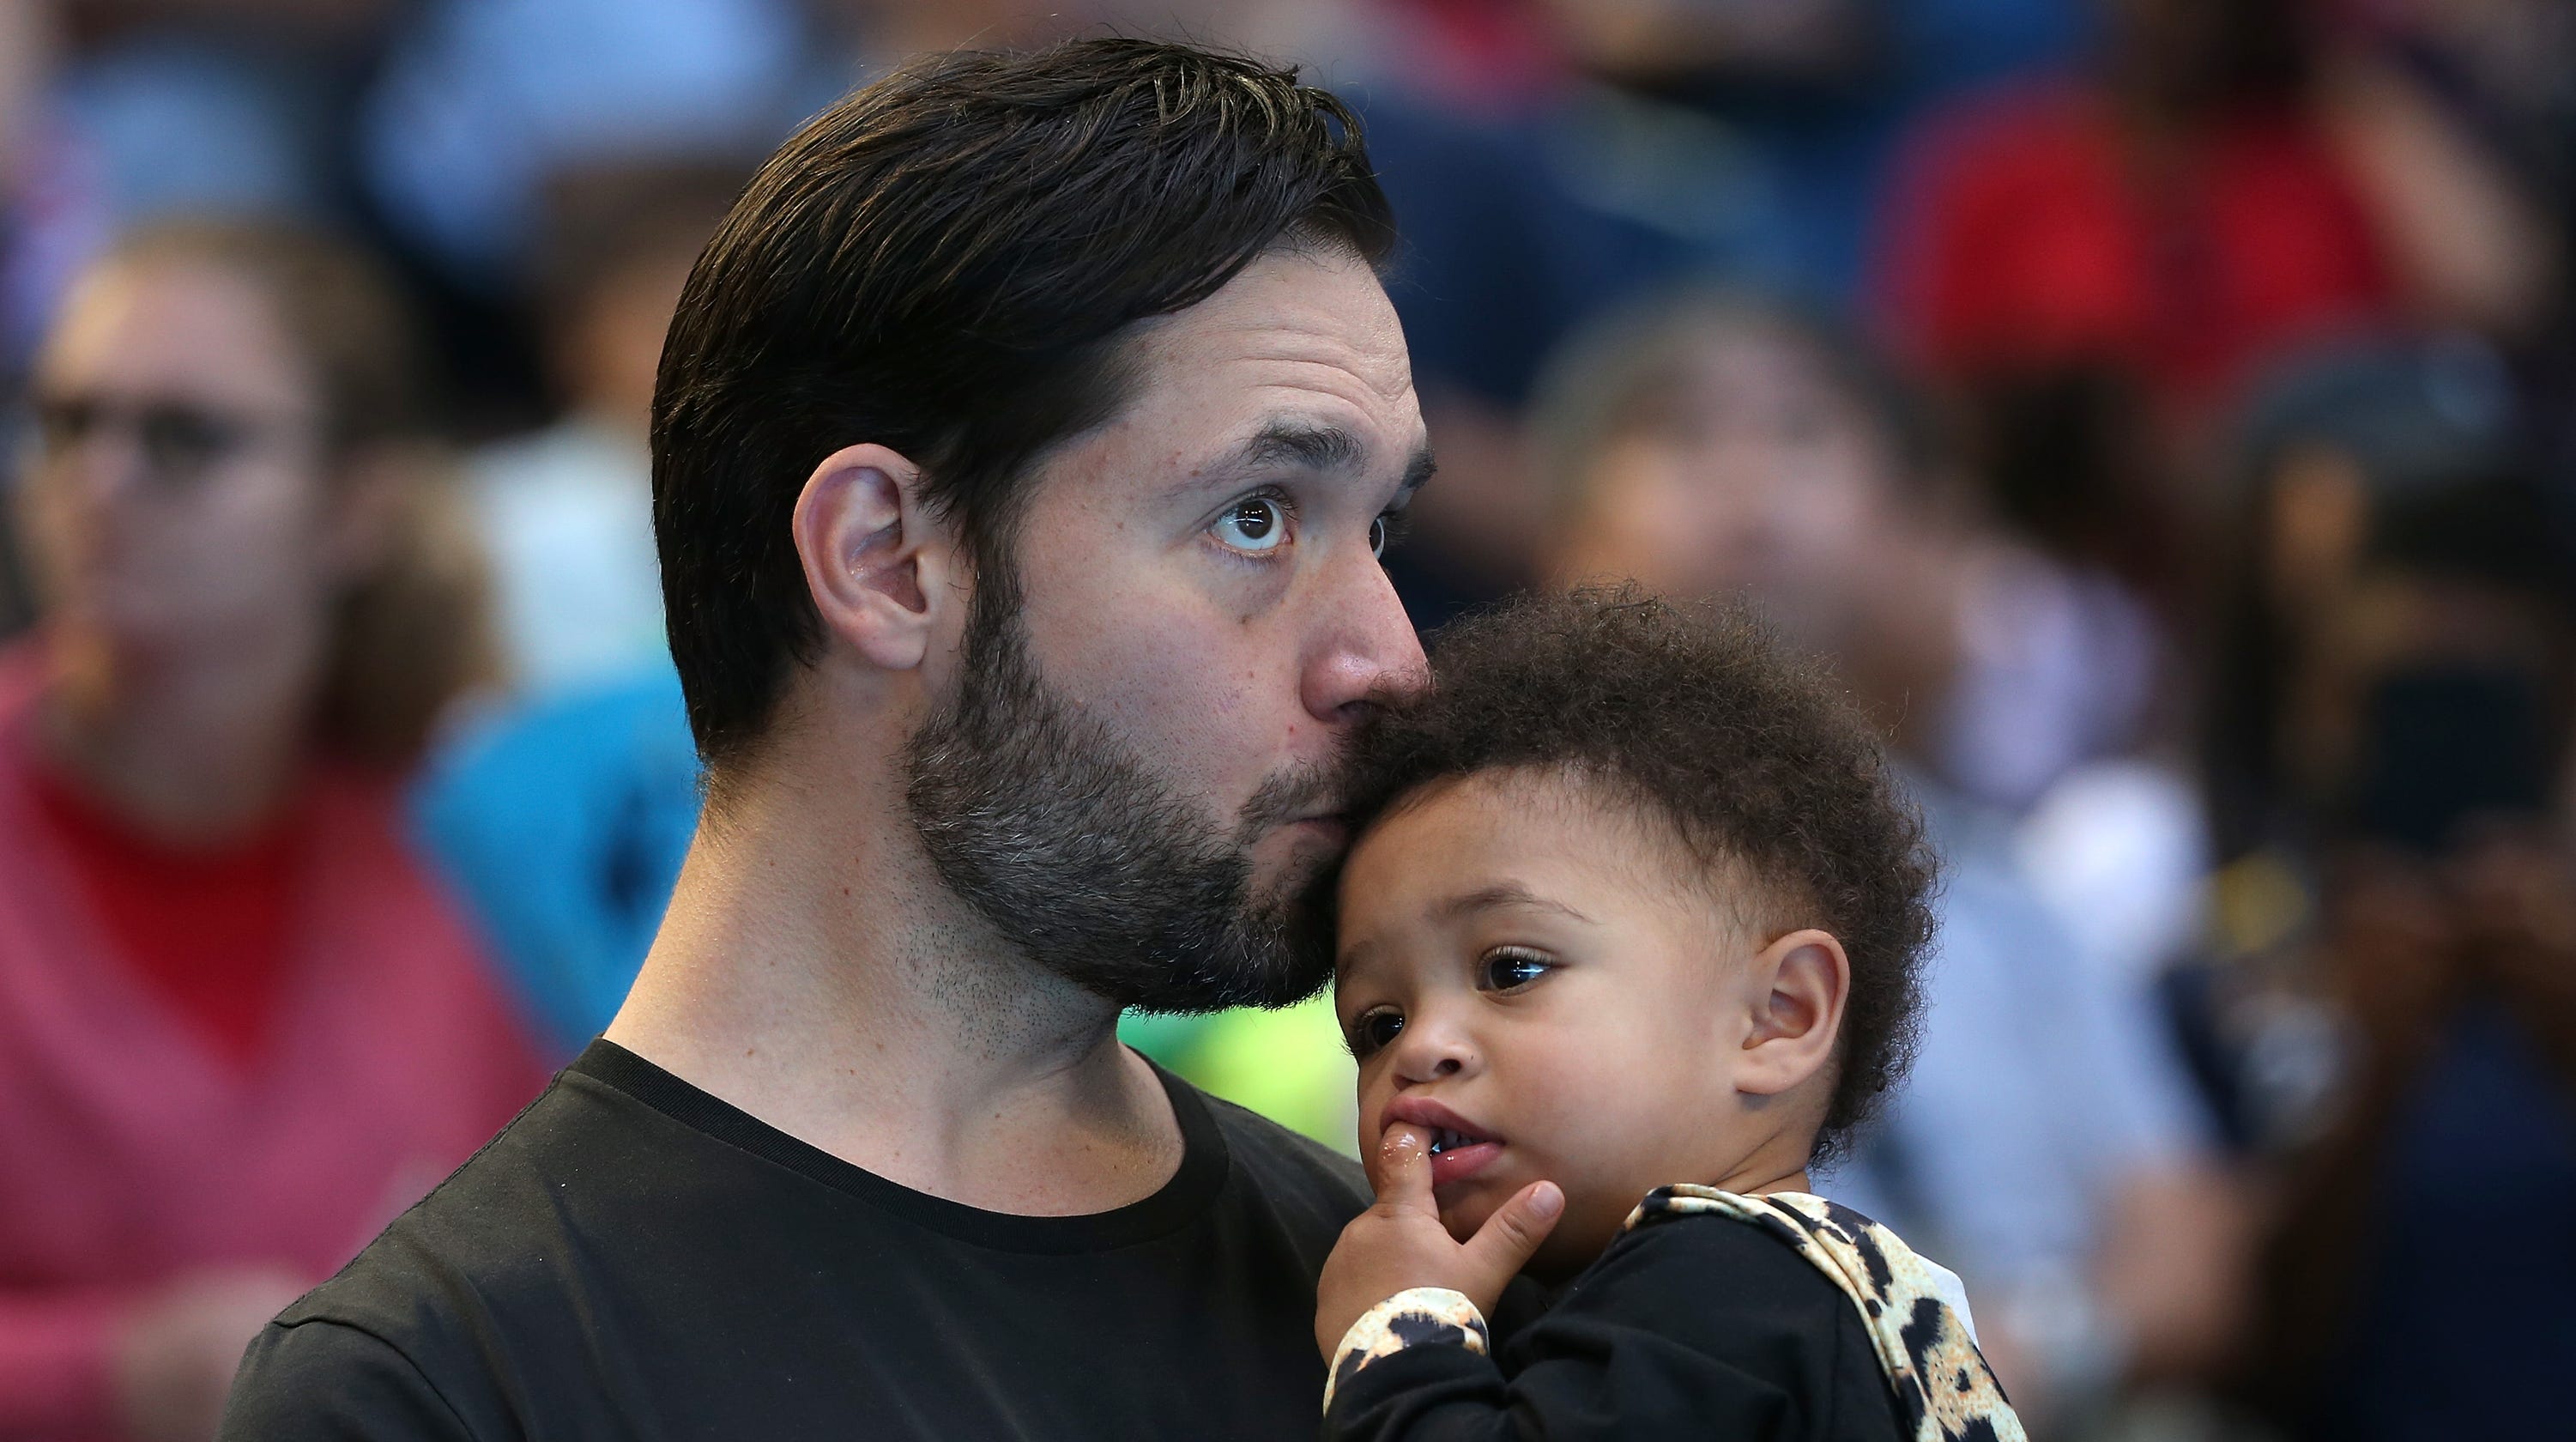 Alexis Ohanian: My parental leave was 'showing up' for Serena Williams3002 x 1680